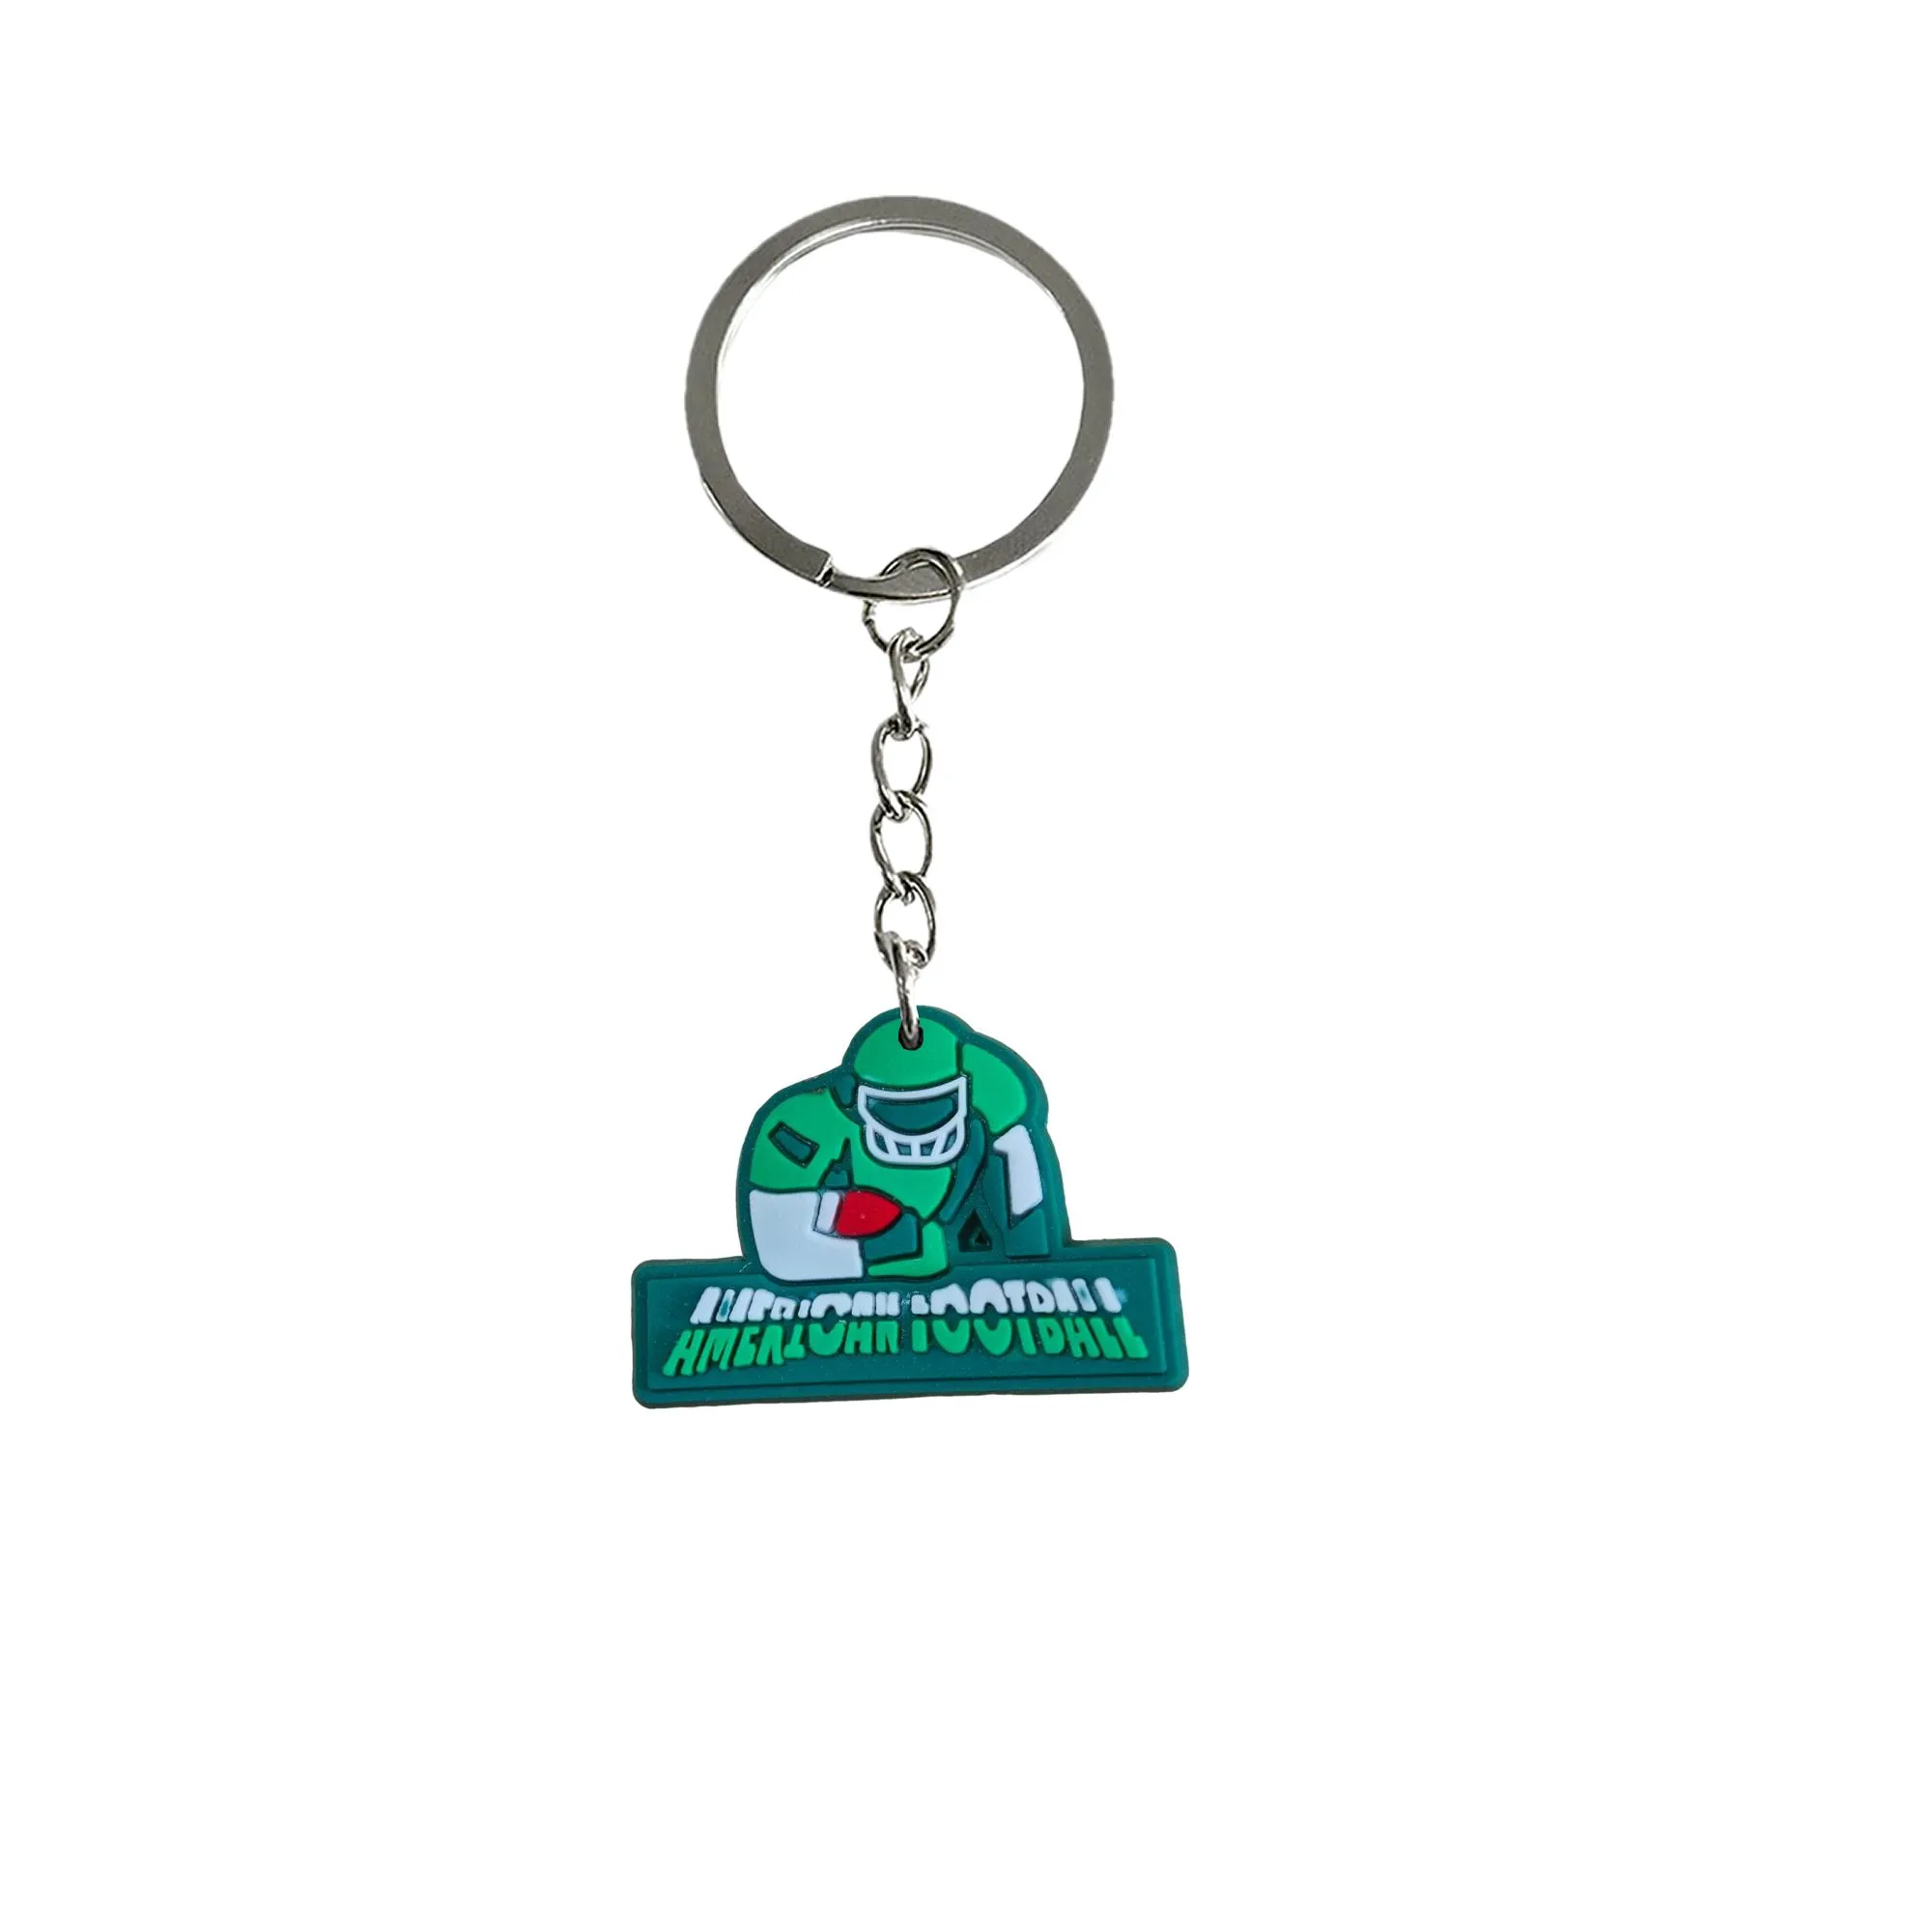 rugby 13 keychain goodie bag stuffers supplies key rings for classroom prizes keyring suitable schoolbag keyrings bags kids party favors keychains men